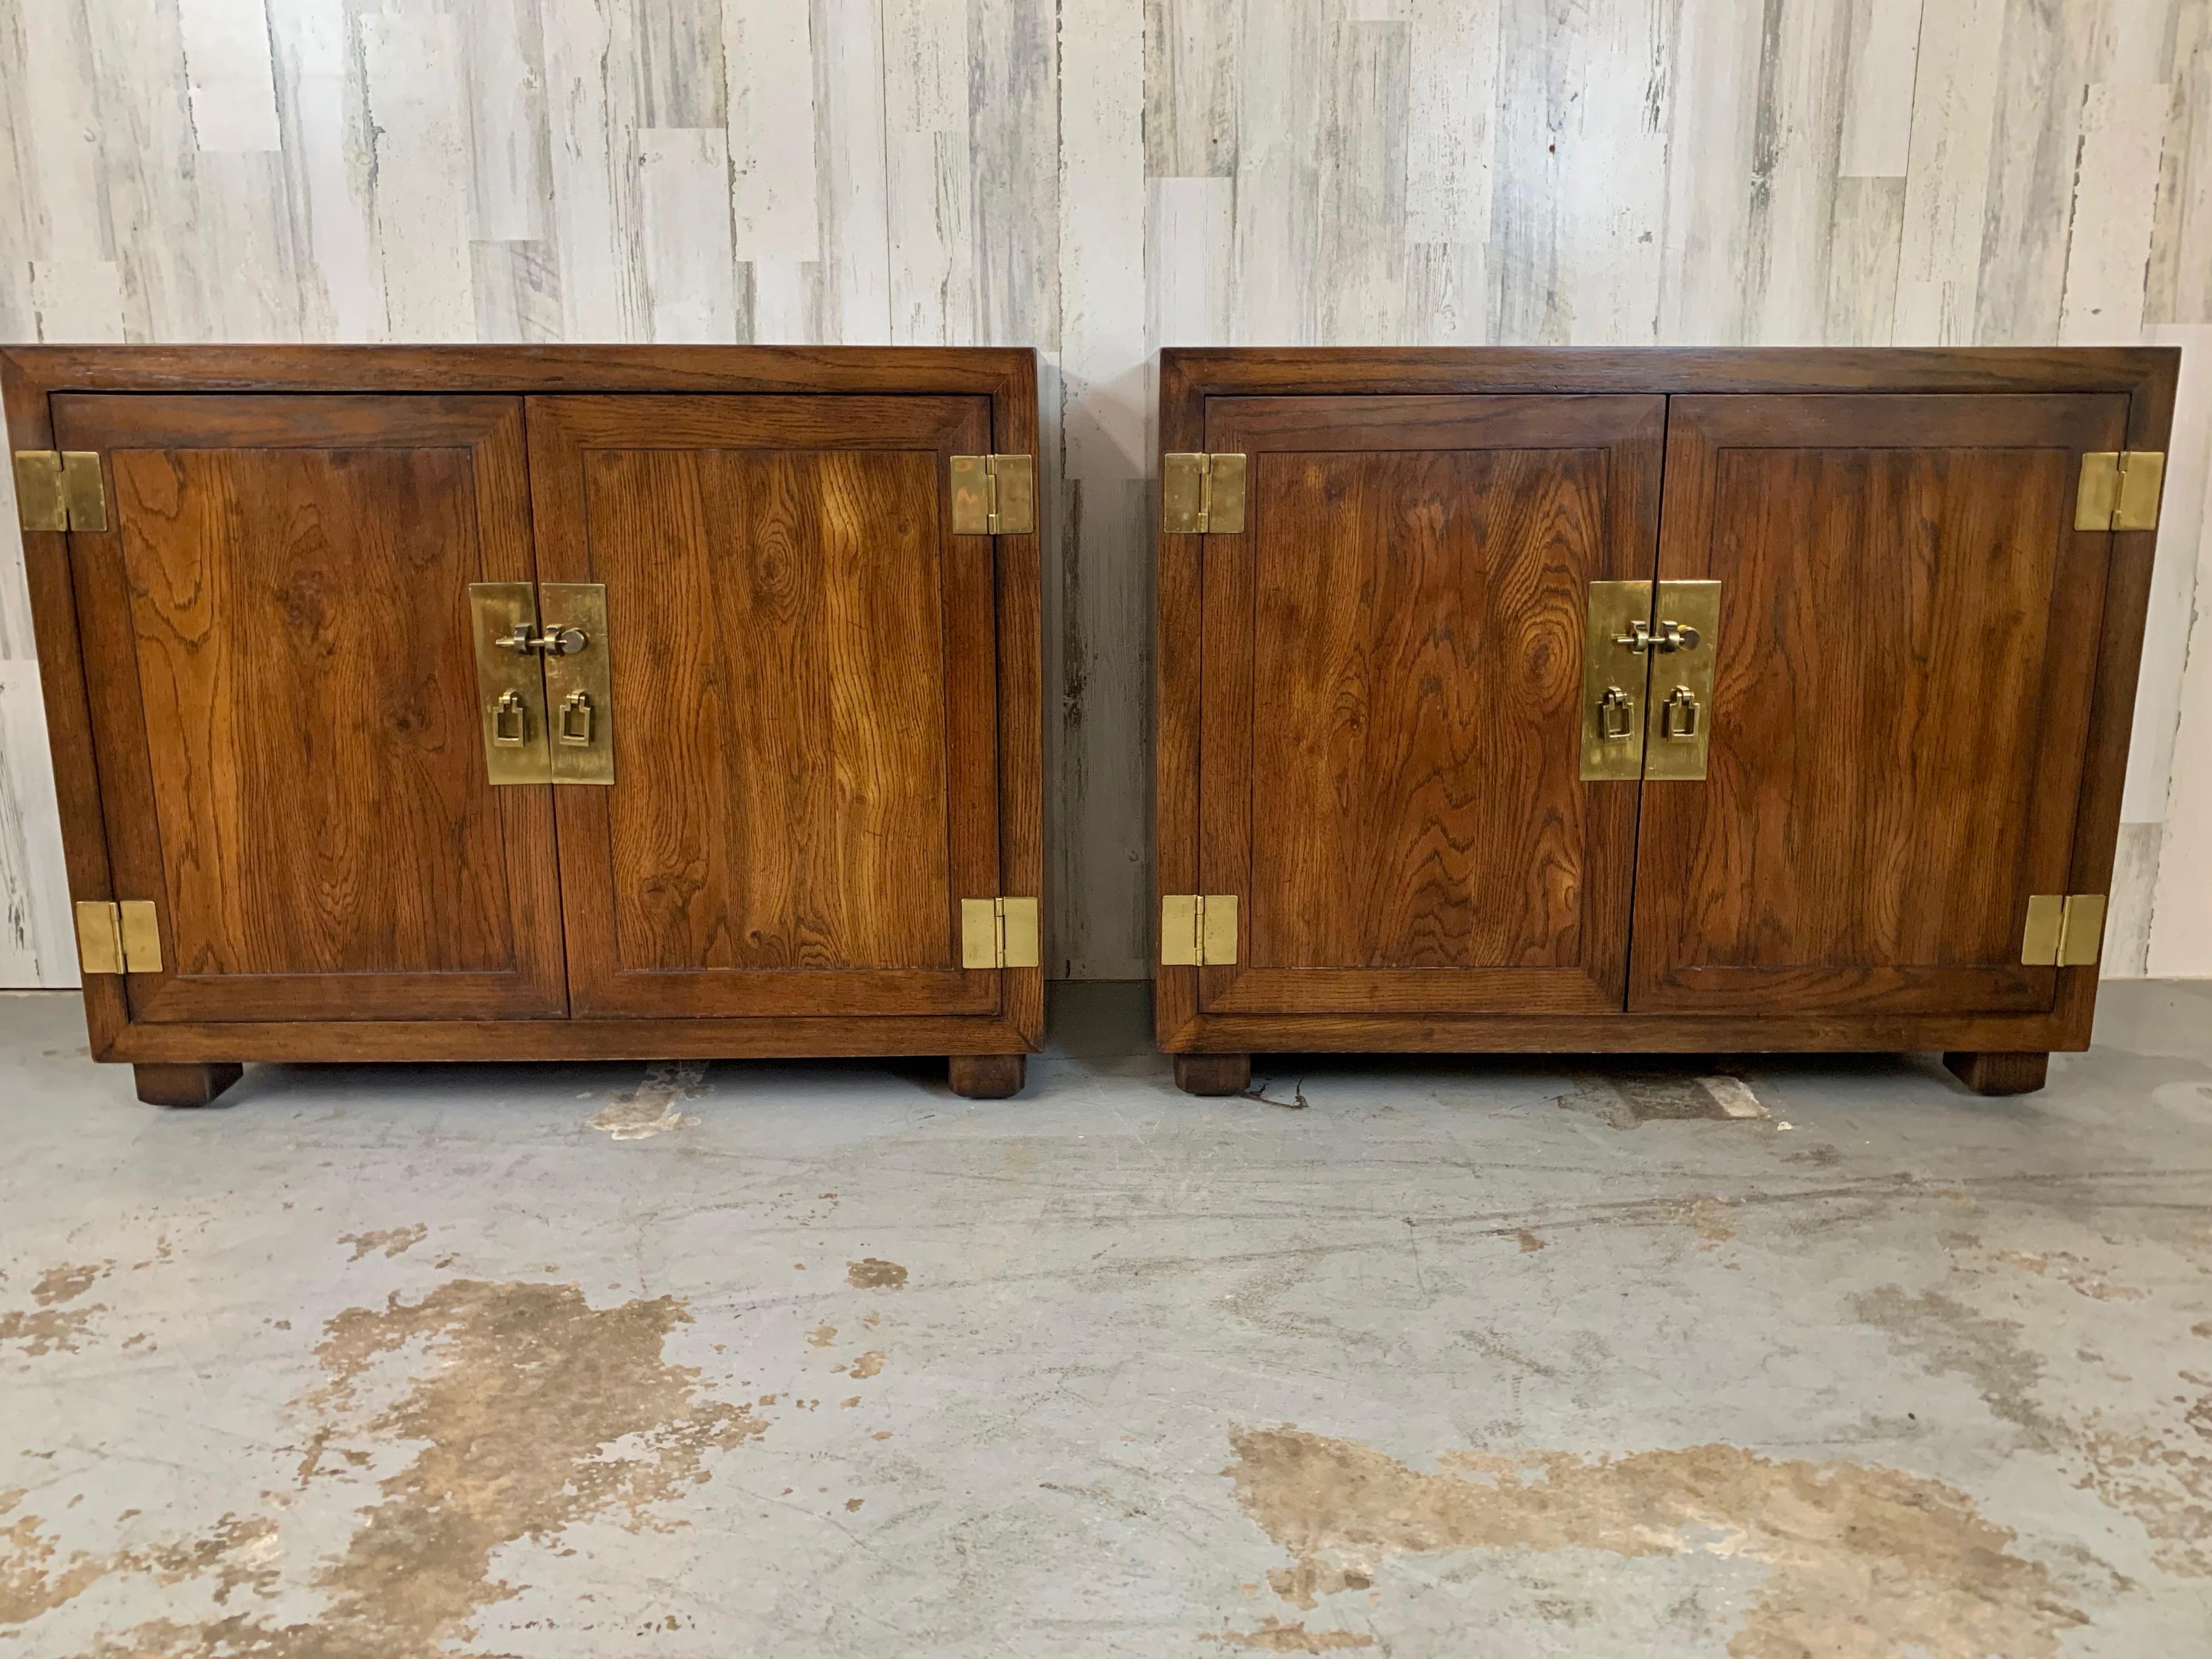 A pair of console cabinets from Henredon's Artefacts Collection, designed in a campaign style. Crafted from oak with a subtly distressed finish, it showcases banded door fronts, a sleek surface top, brass hardware, and sturdy block feet.